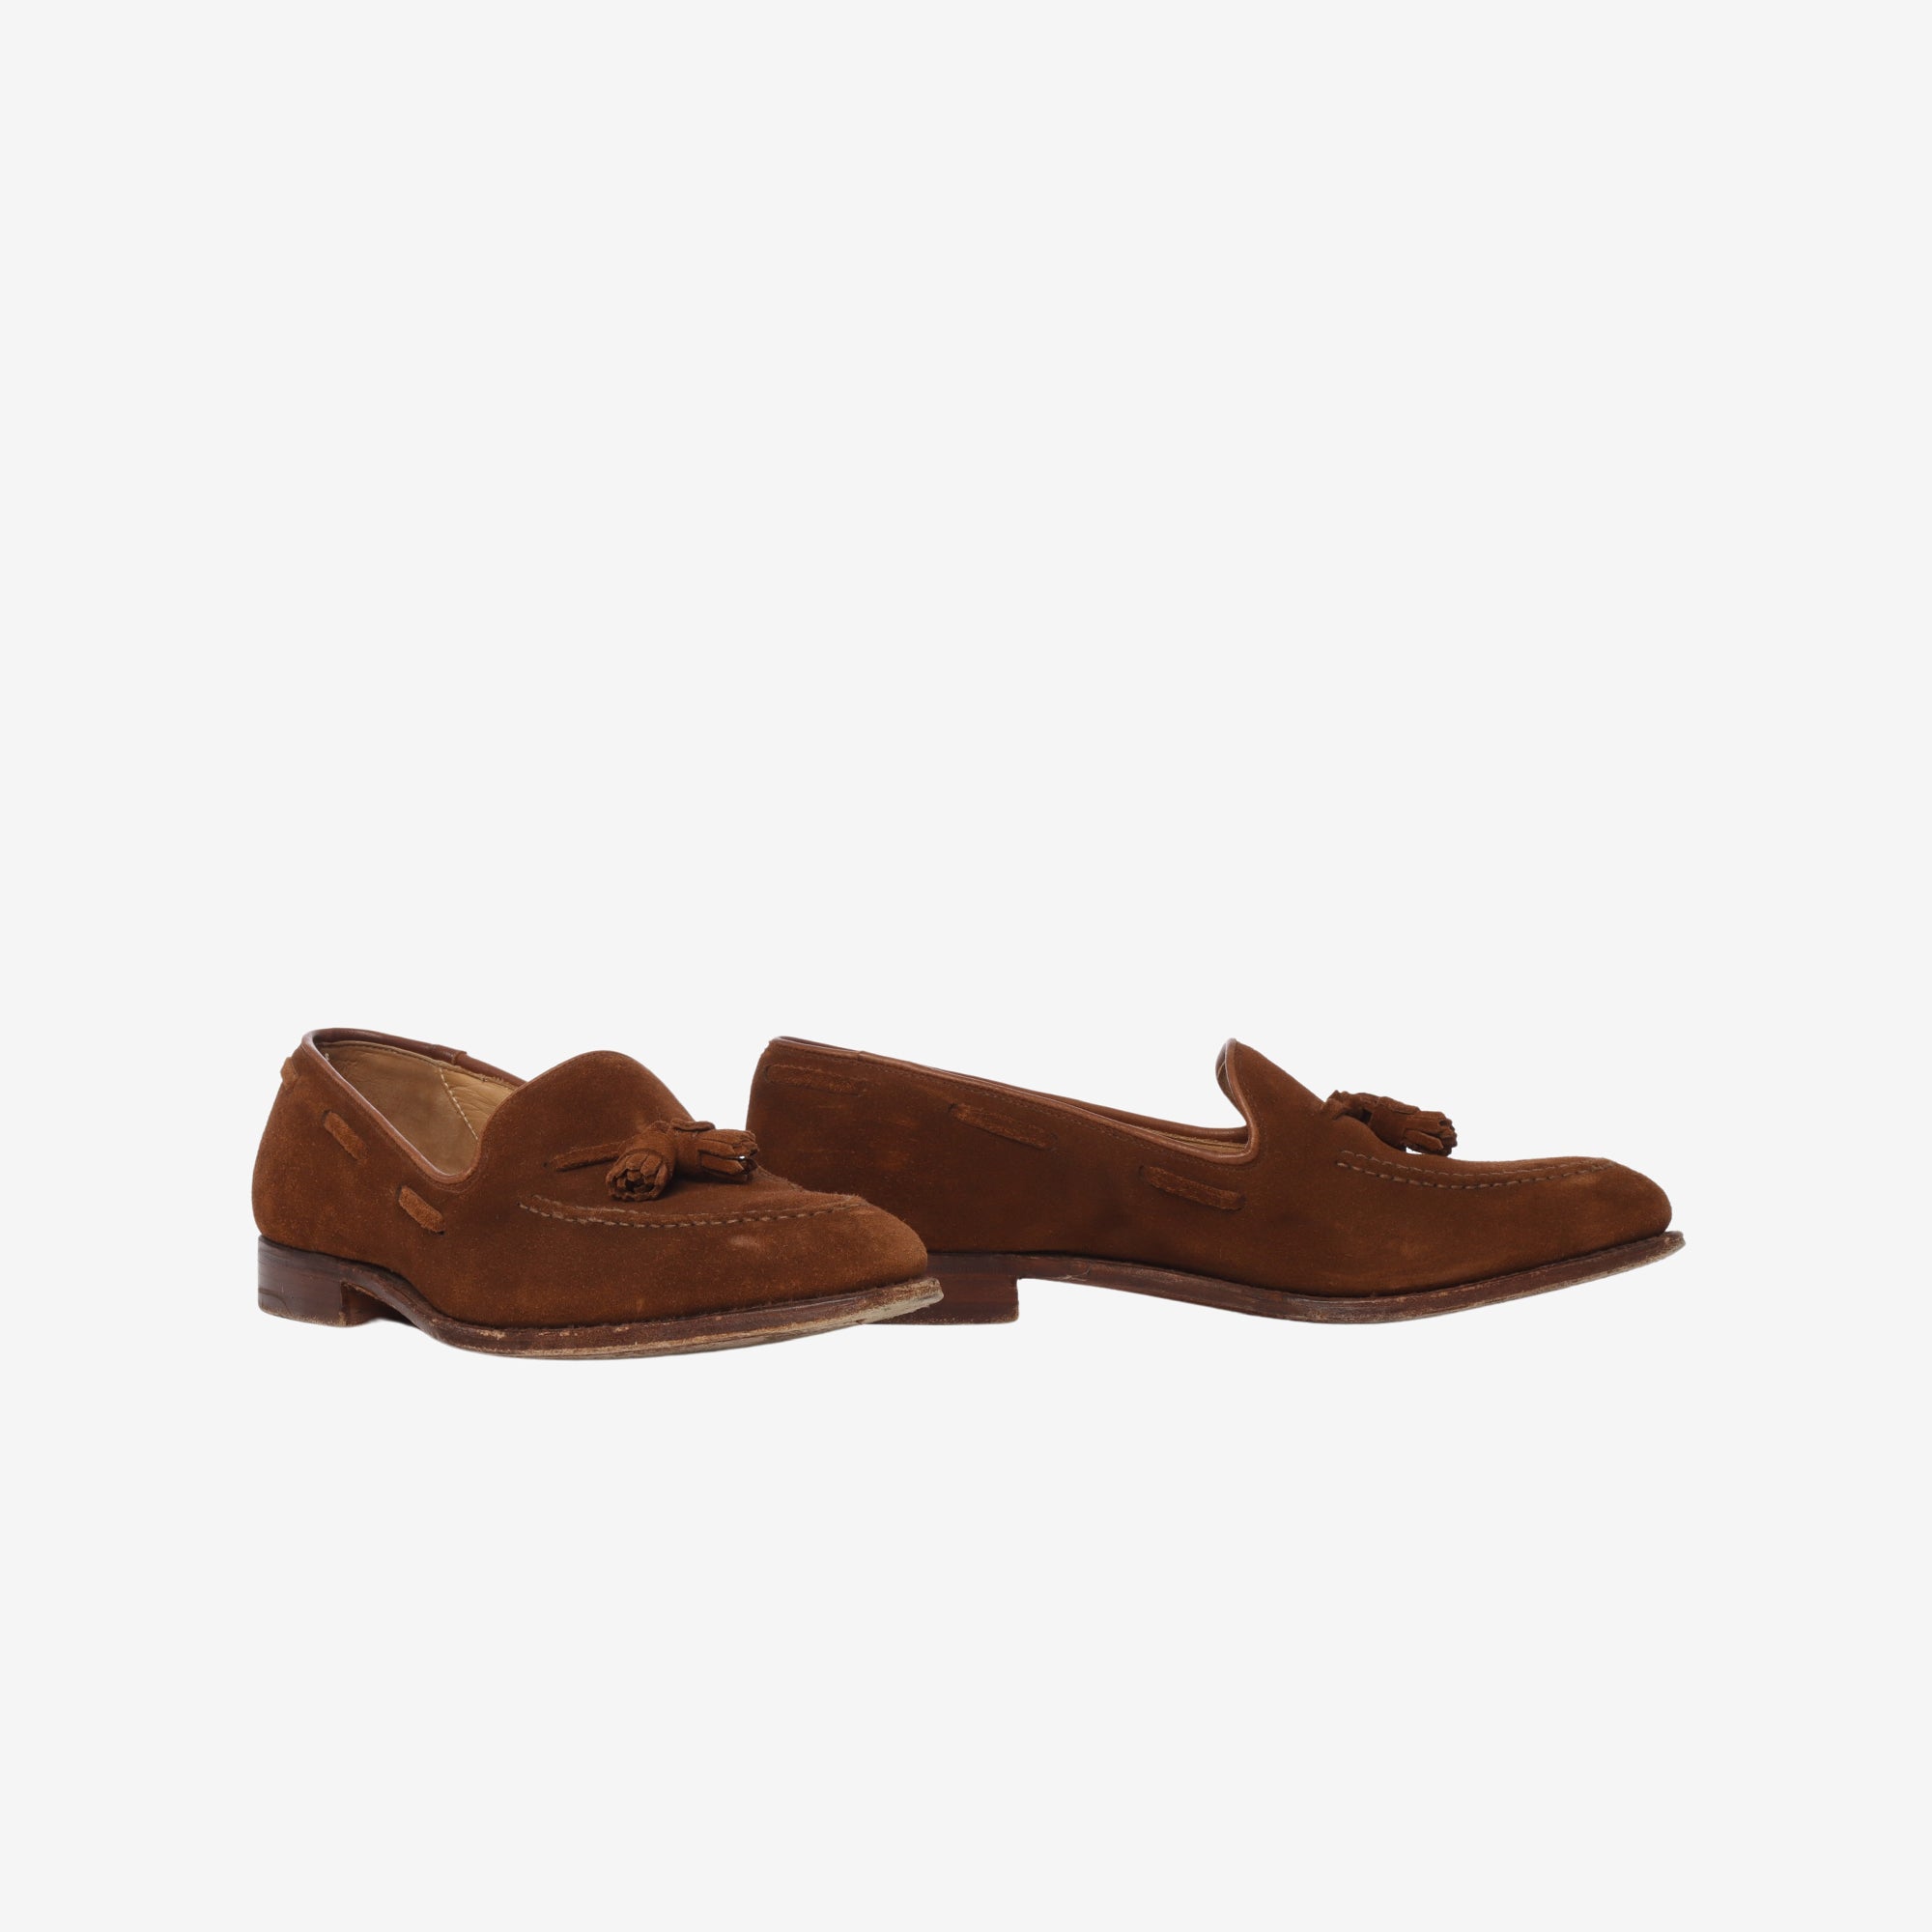 Carly Tassel Loafers